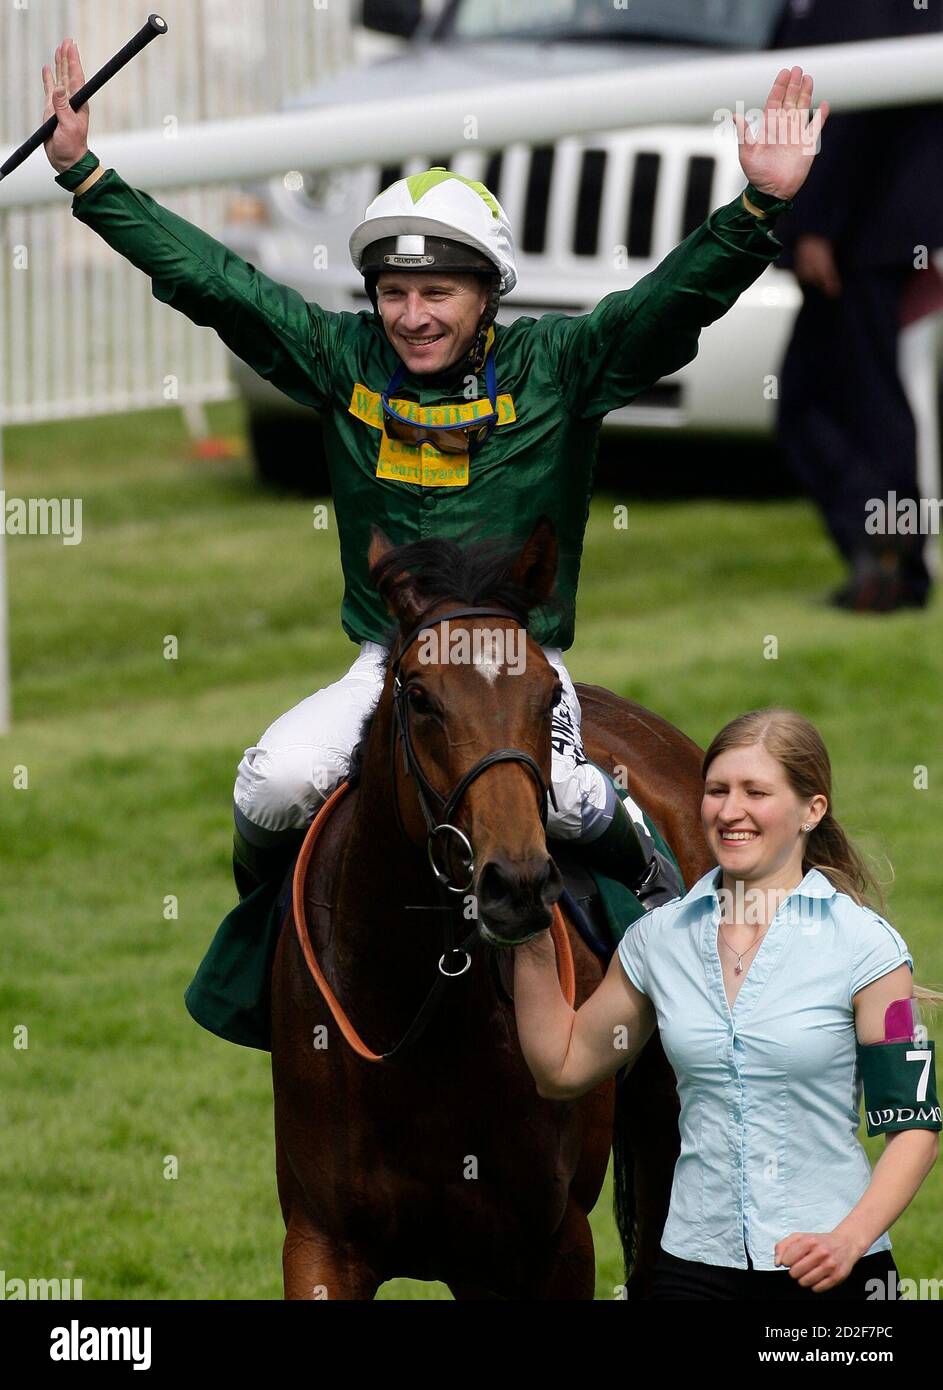 Seb Sanders celebrates winning the Oaks on his mount Look Here during the Epsom Derby Festival at Epsom Downs in Surrey, southern England June 6, 2008.    REUTERS/Darren Staples   (BRITAIN) Stock Photo